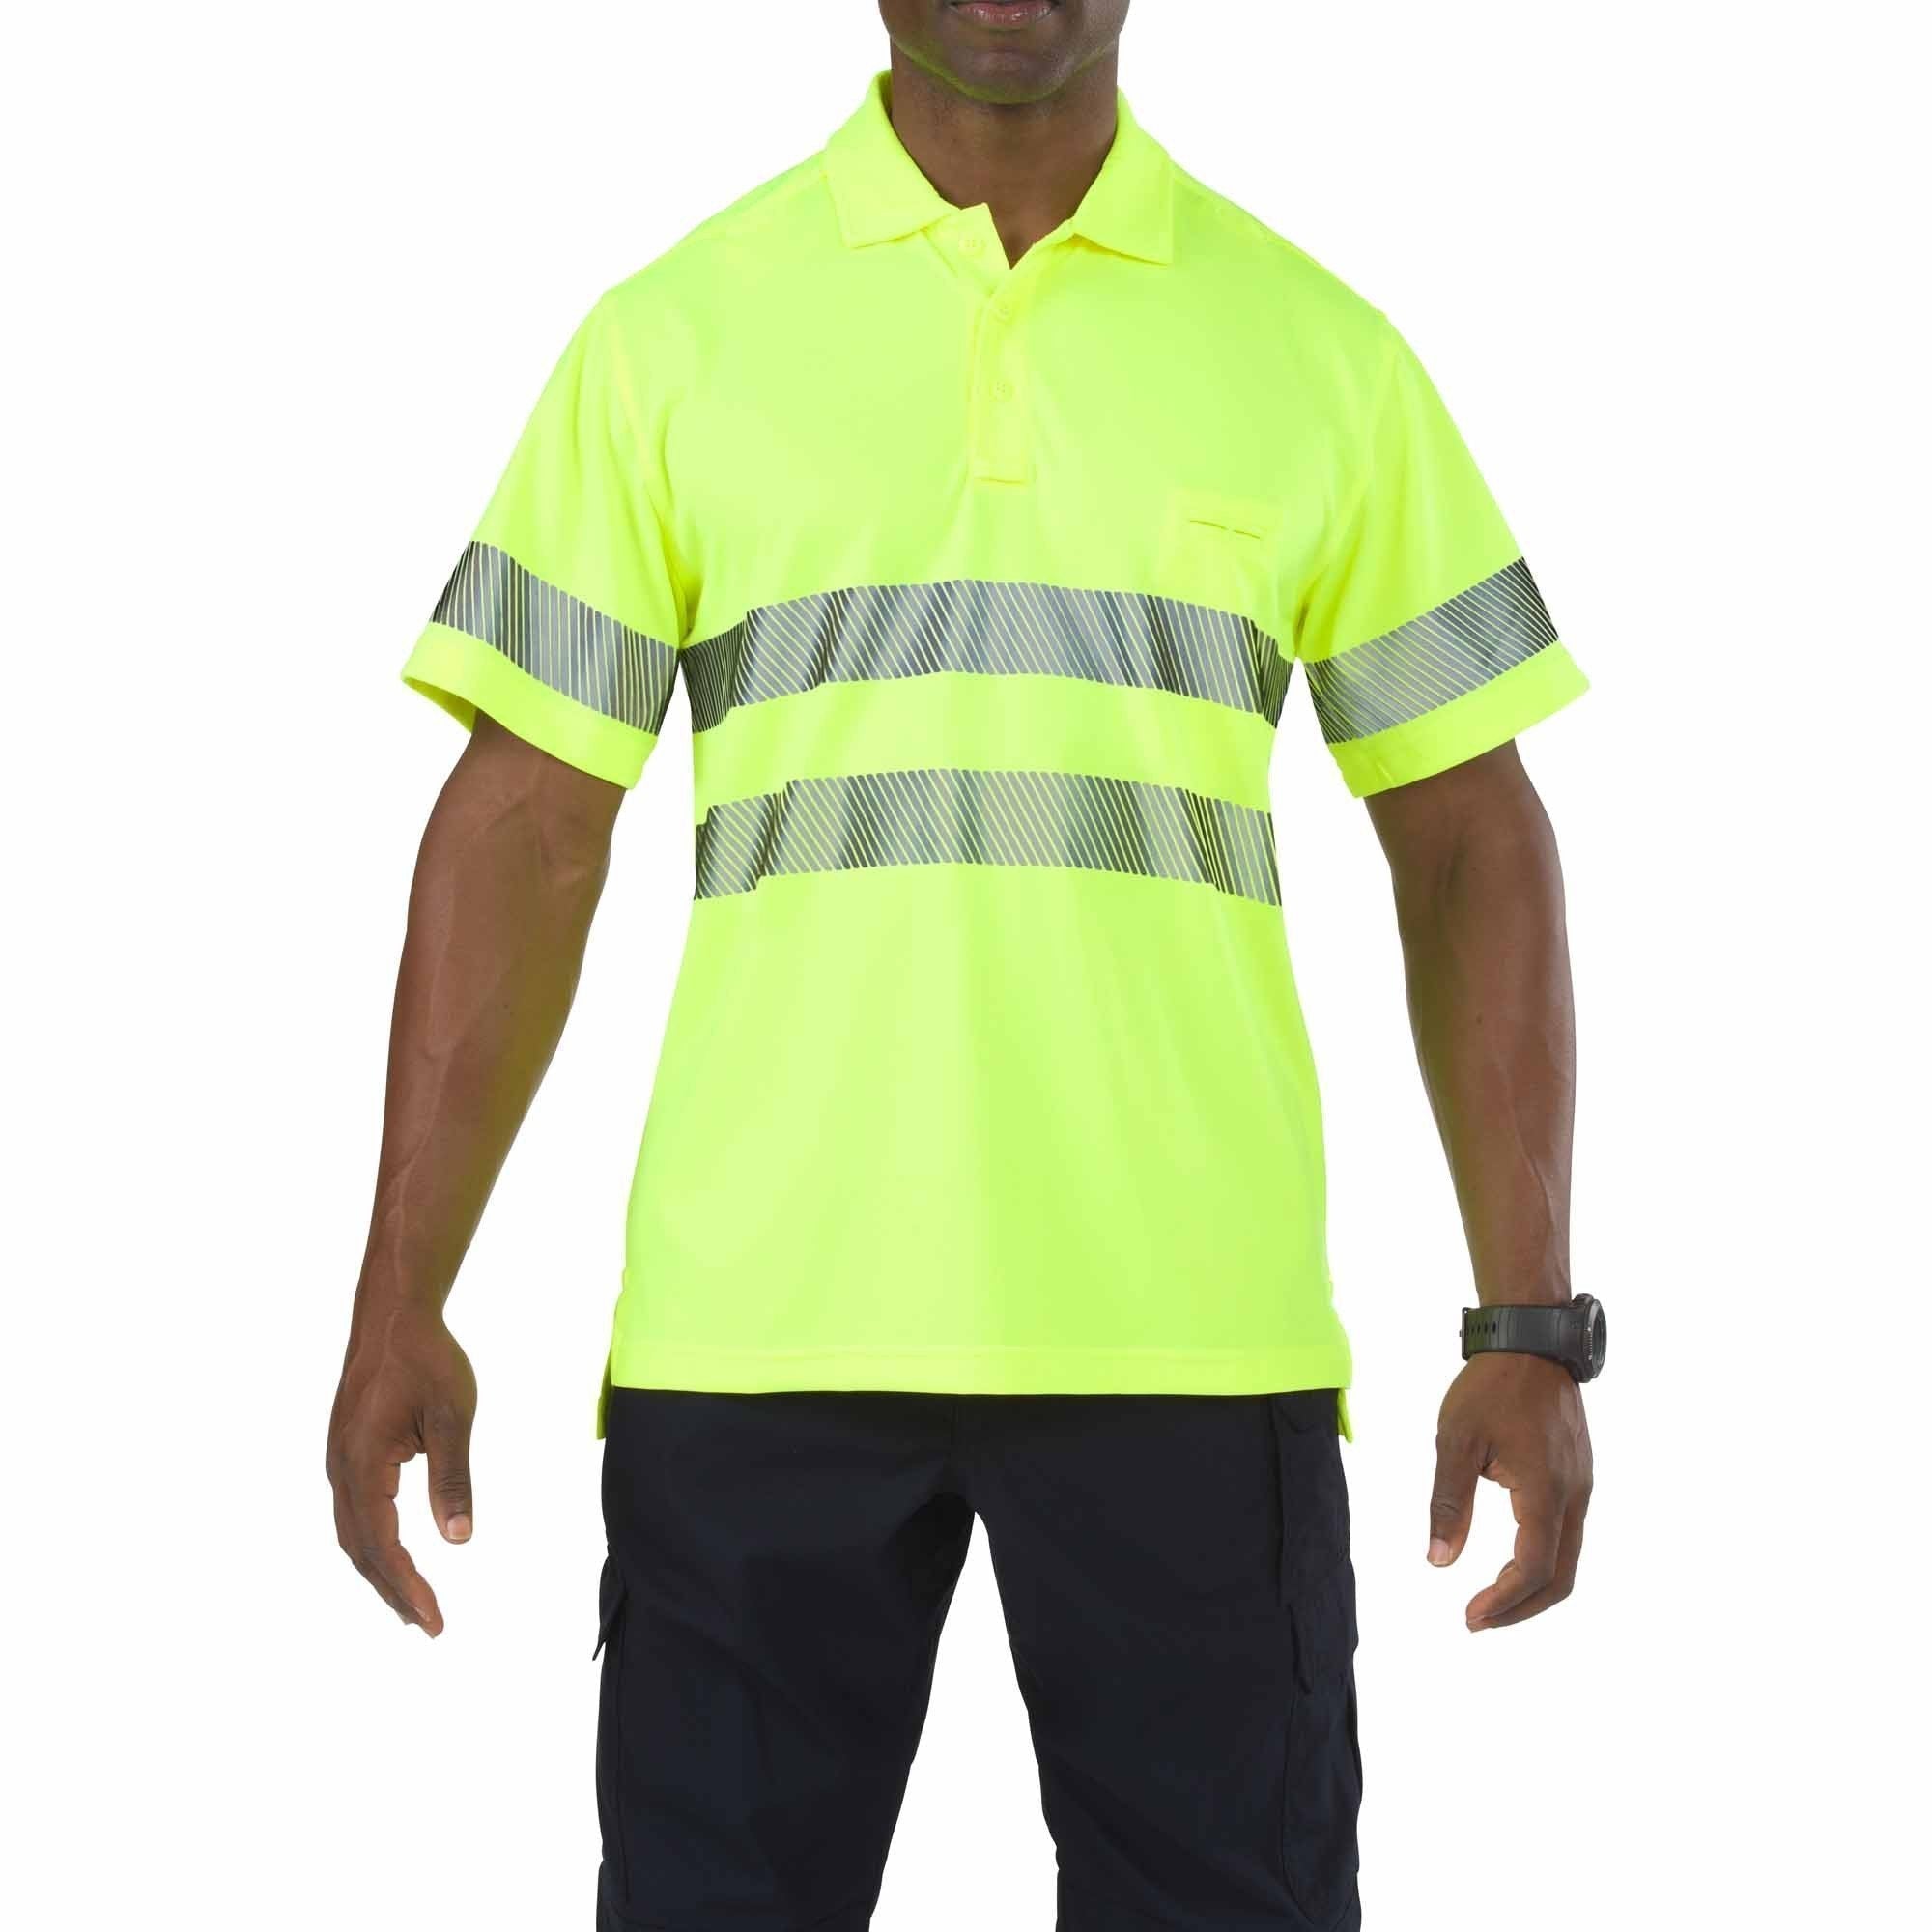 5.11 Tactical High-Visibility Yellow Short Sleeve Polo Shirts 5.11 Tactical Tactical Gear Supplier Tactical Distributors Australia